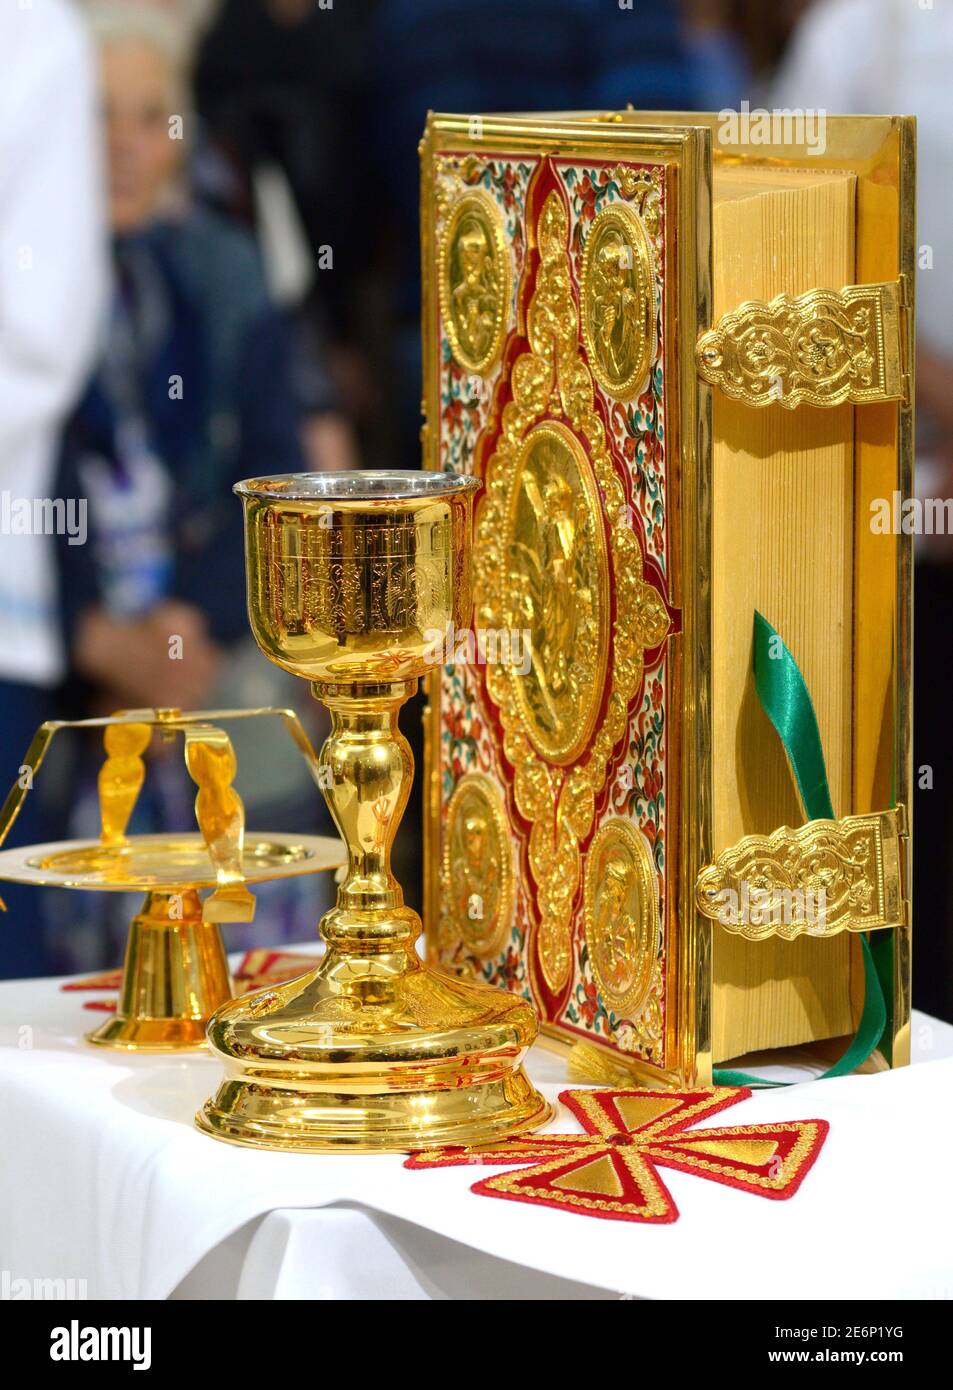 Holy Bible in golden cover, golden cup and candleholder placed on a table during church service Stock Photo